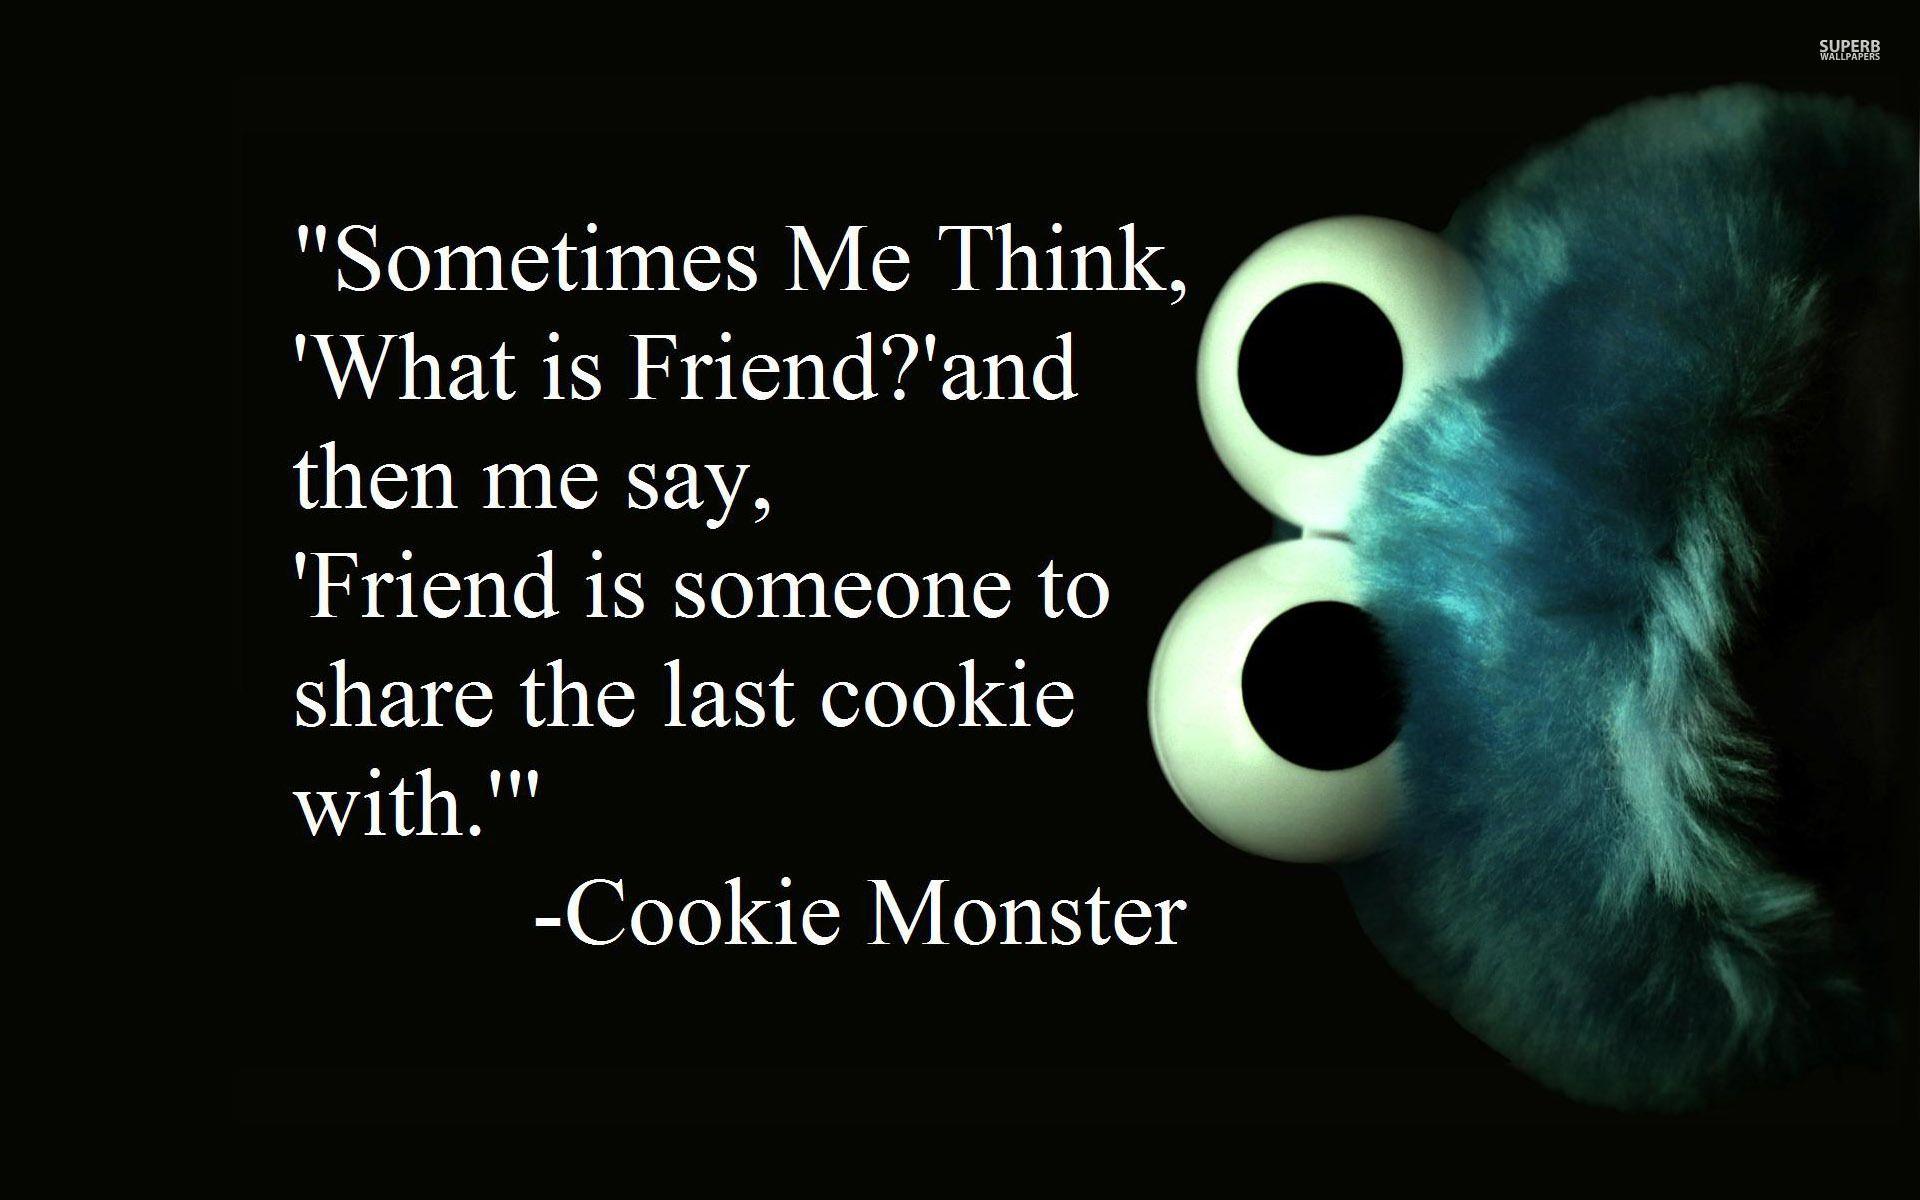 friendship wallpapers with quotes for facebook